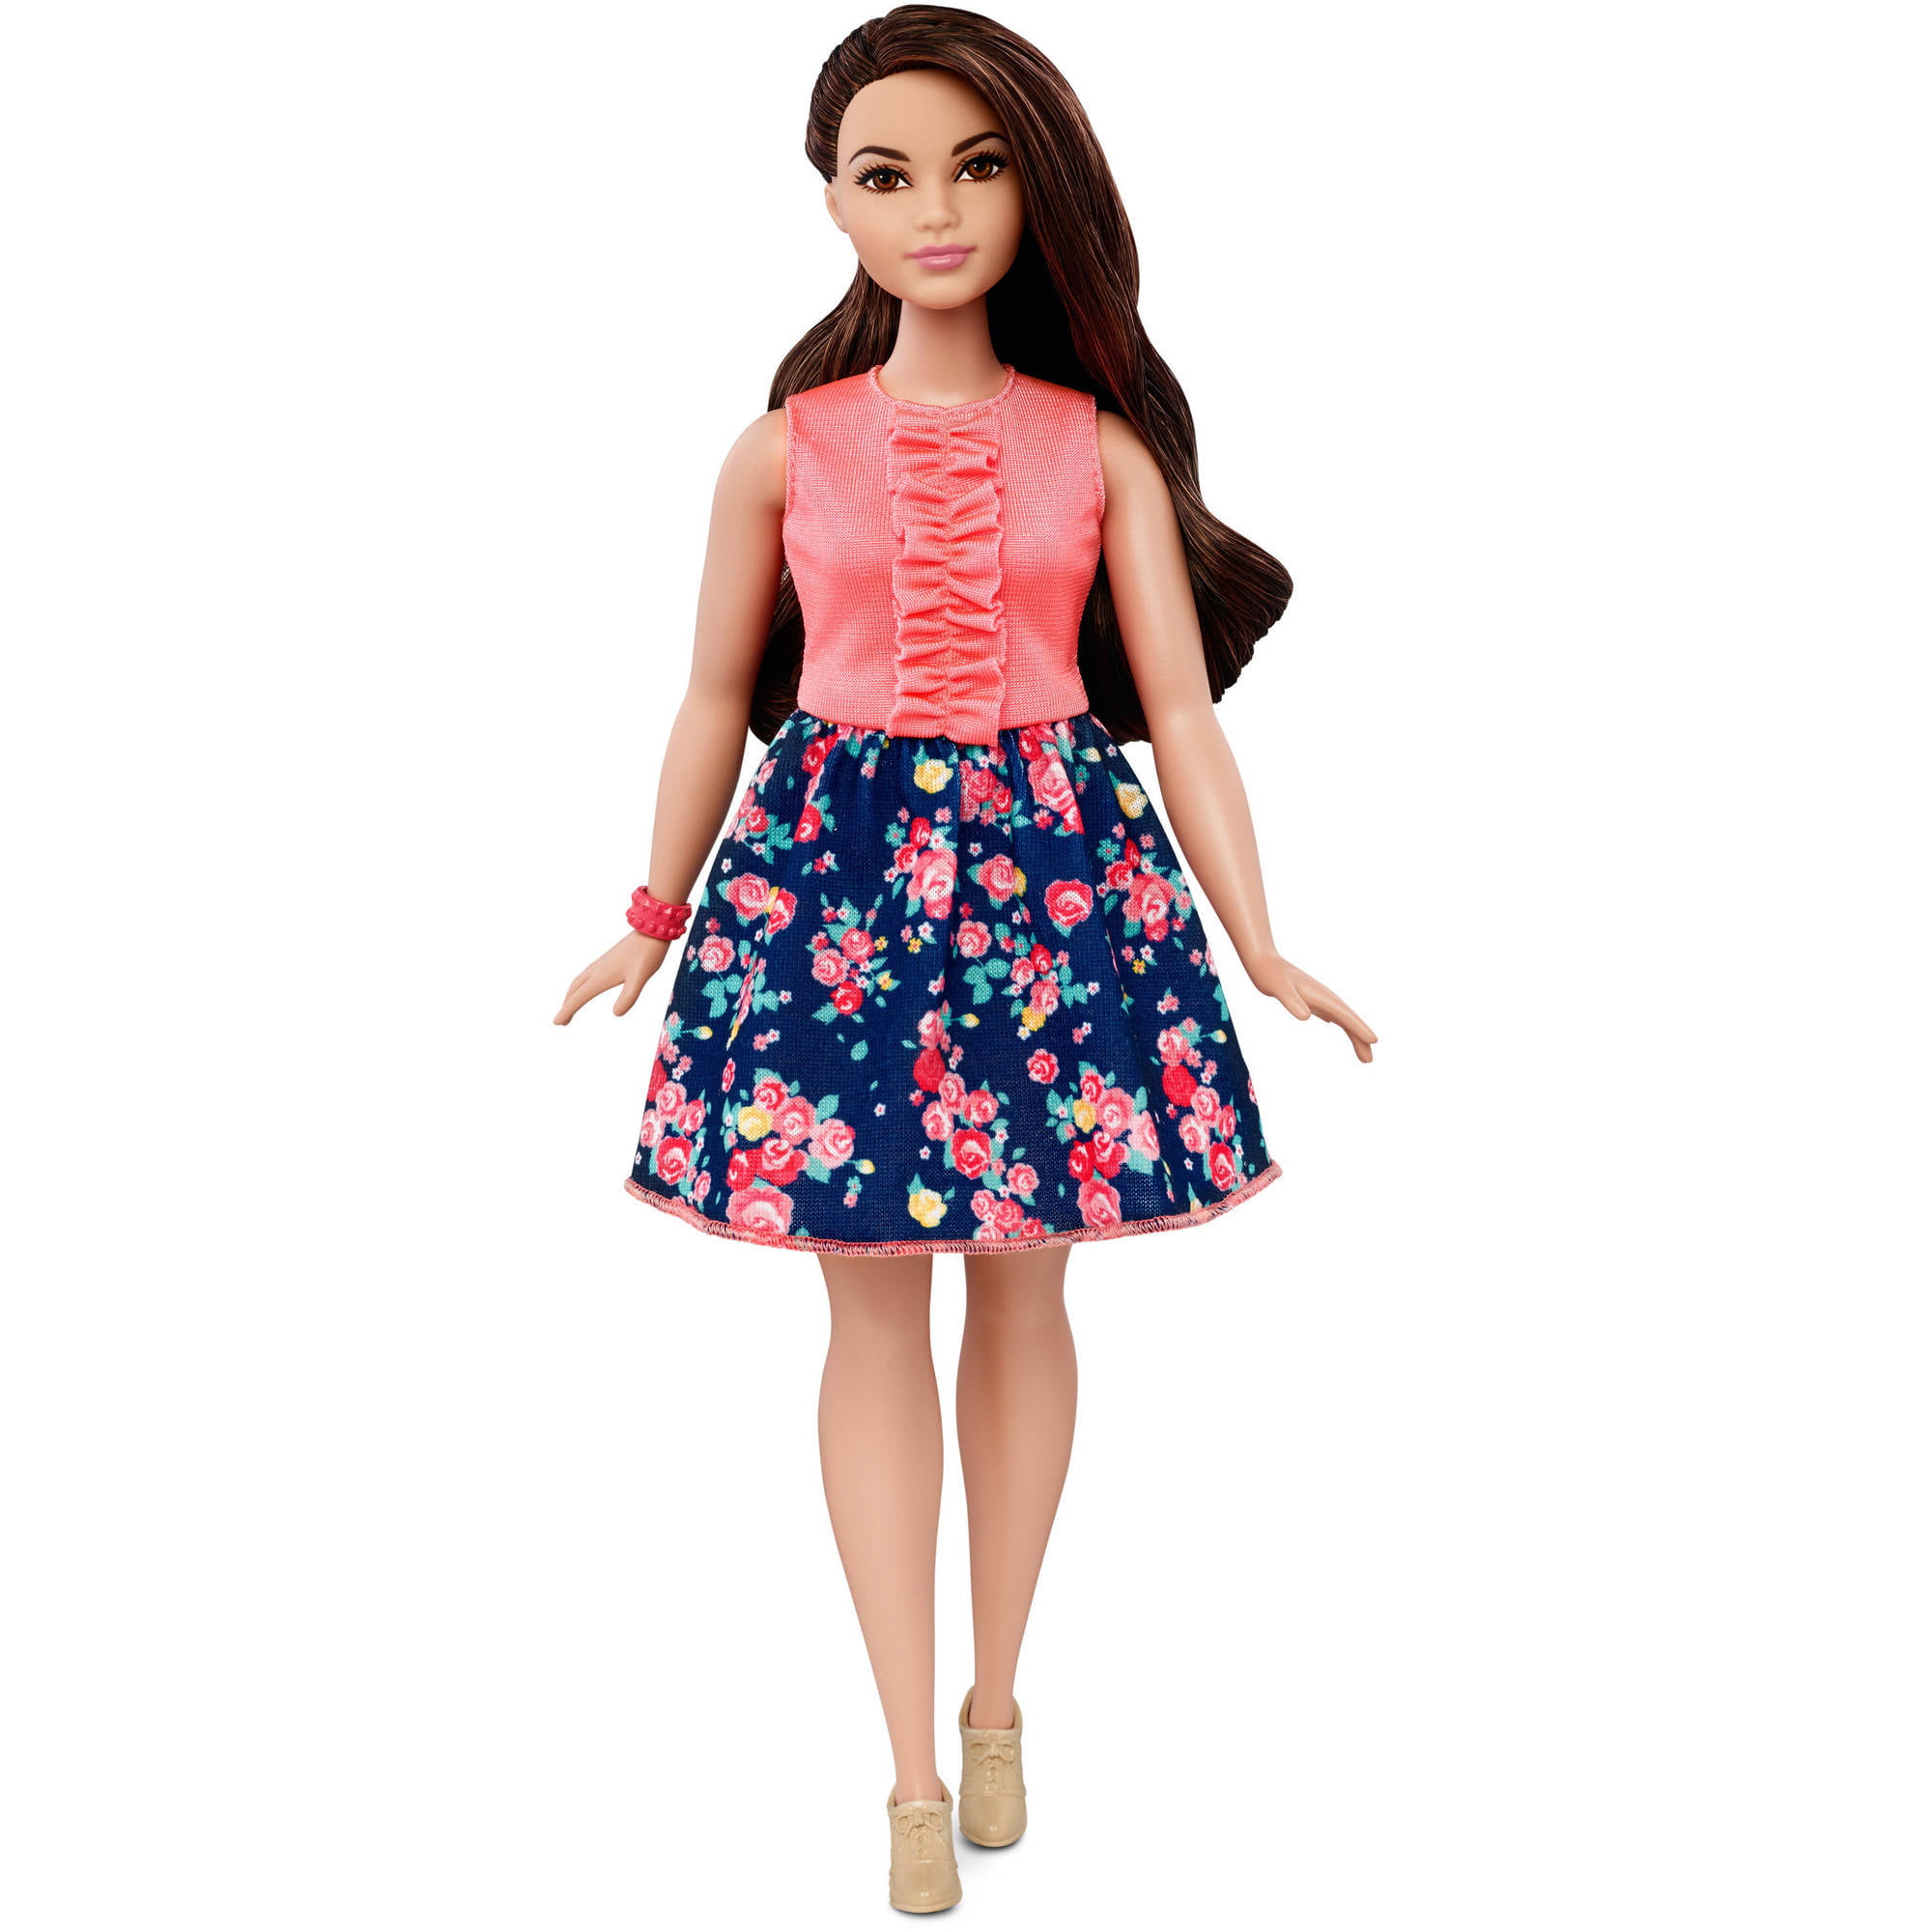 Barbie Fashionistas Doll Curvy Body Type Wearing Floral Romper | The ...